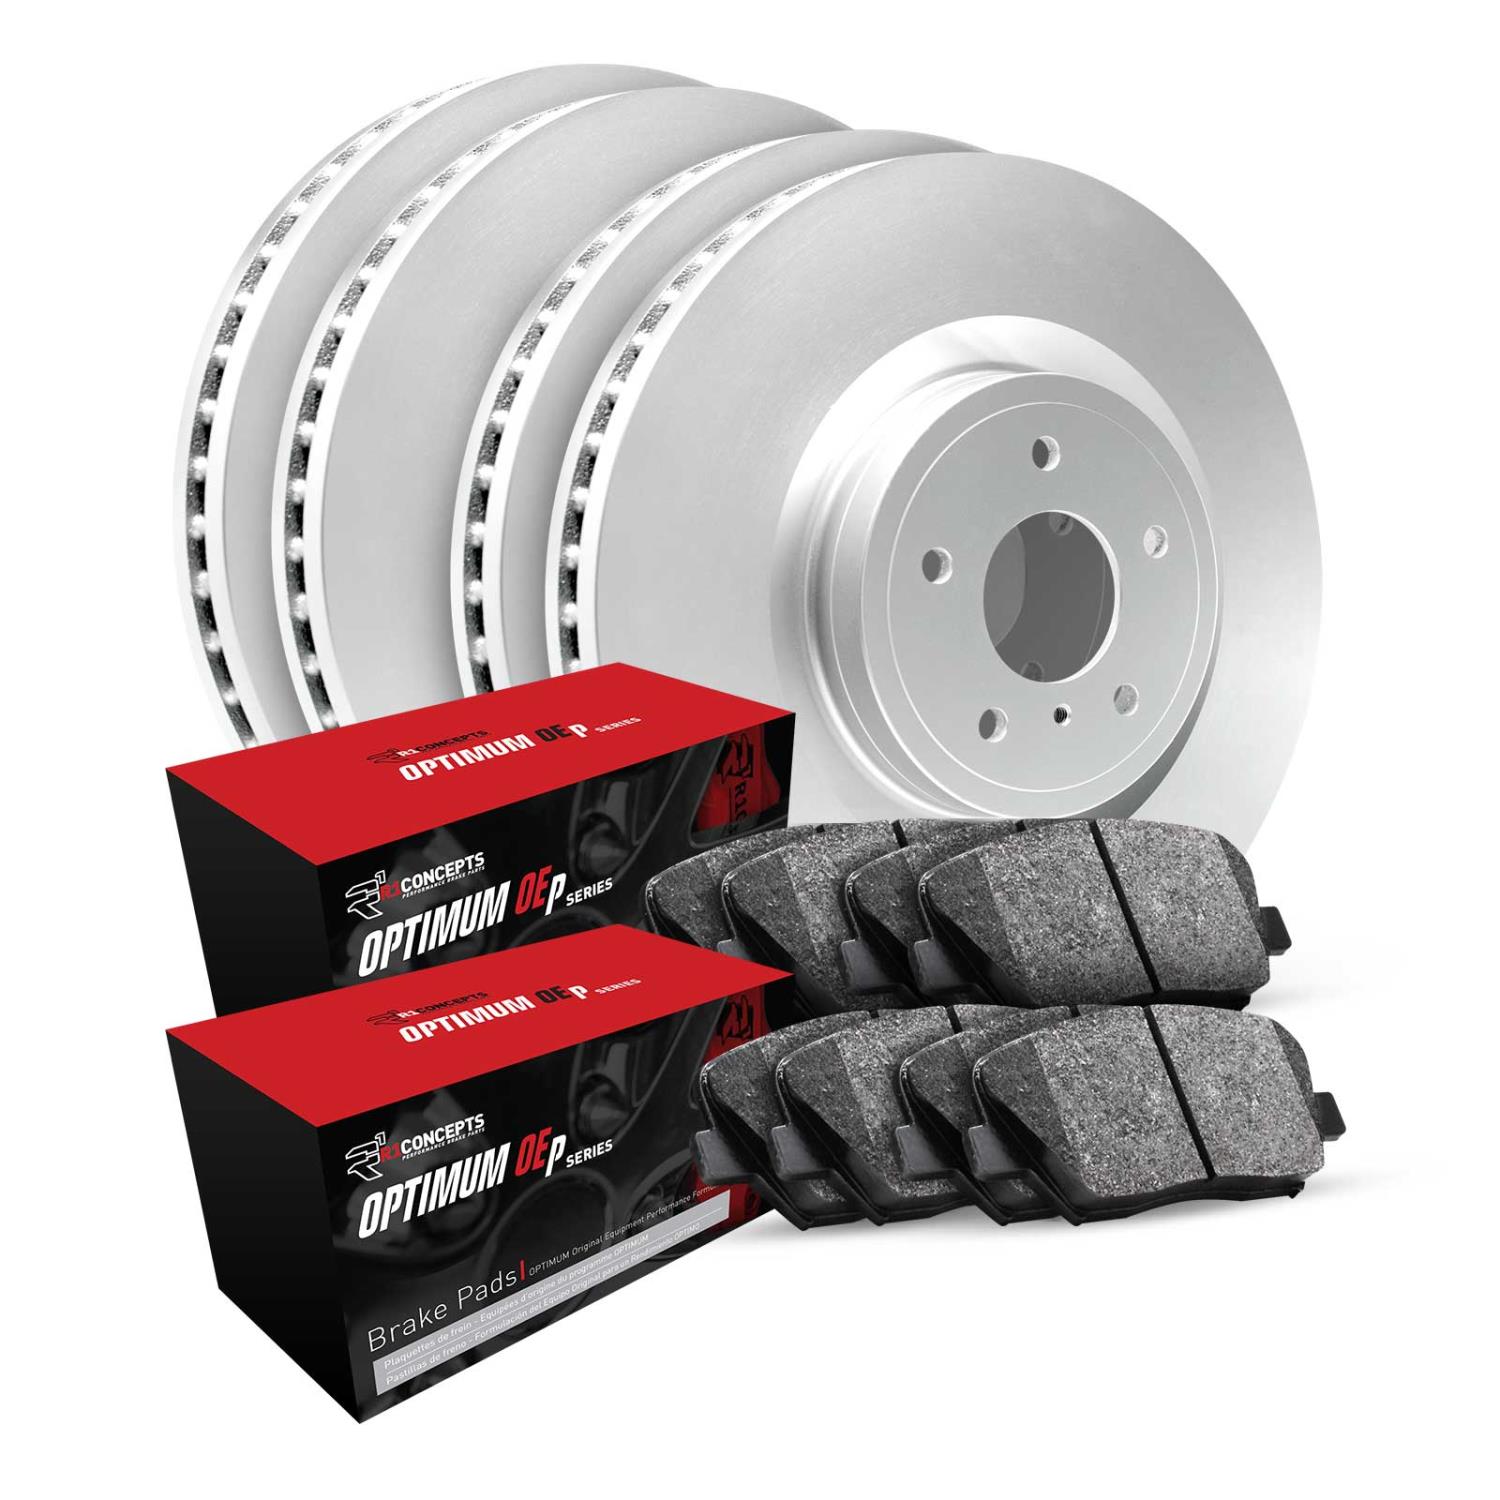 GEO-Carbon Brake Rotor Set w/Optimum OE Pads, 2009-2019 Fits Multiple Makes/Models, Position: Front & Rear